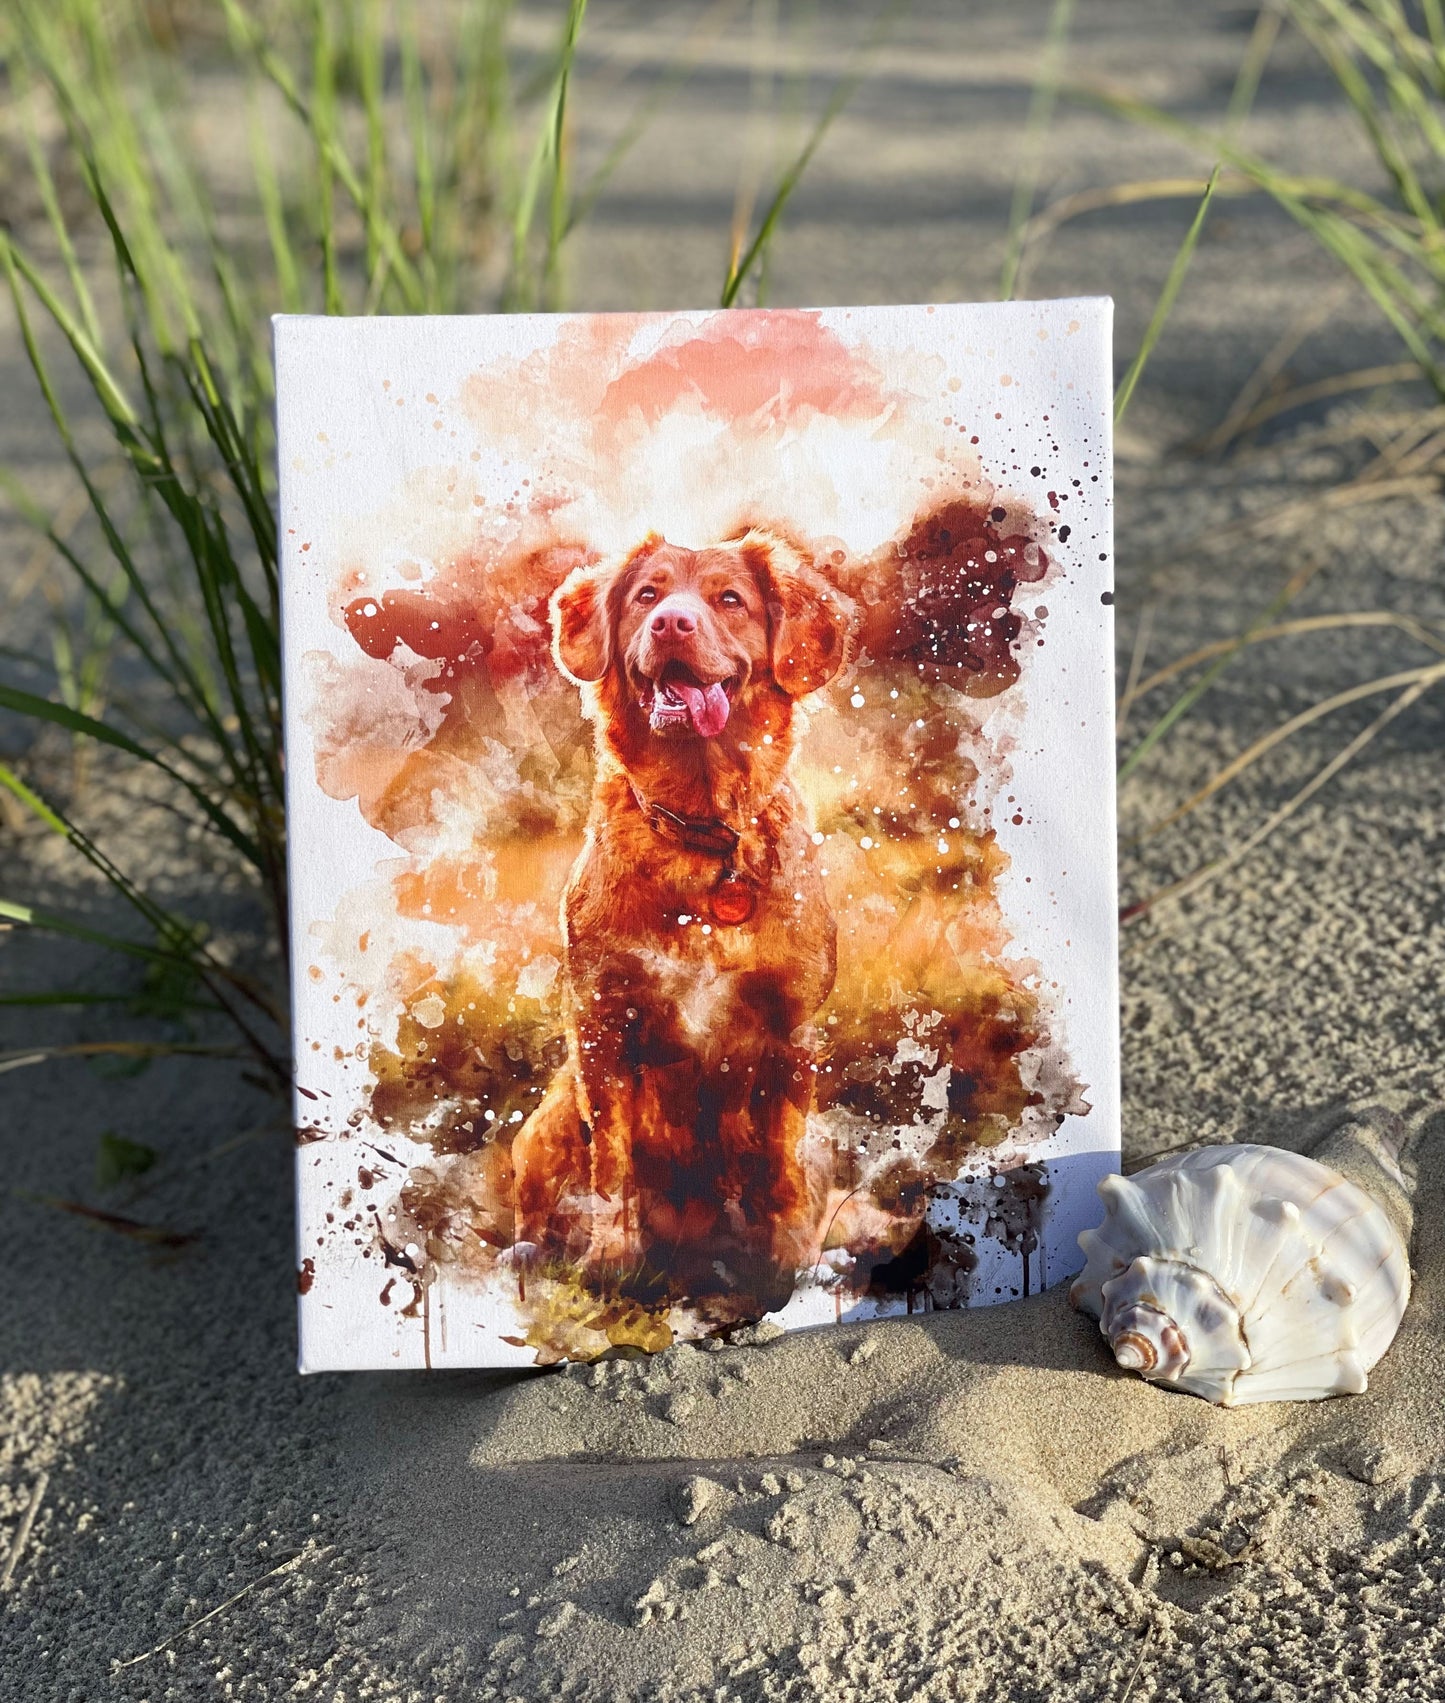 Custom Watercolor Dog Portrait from Photo